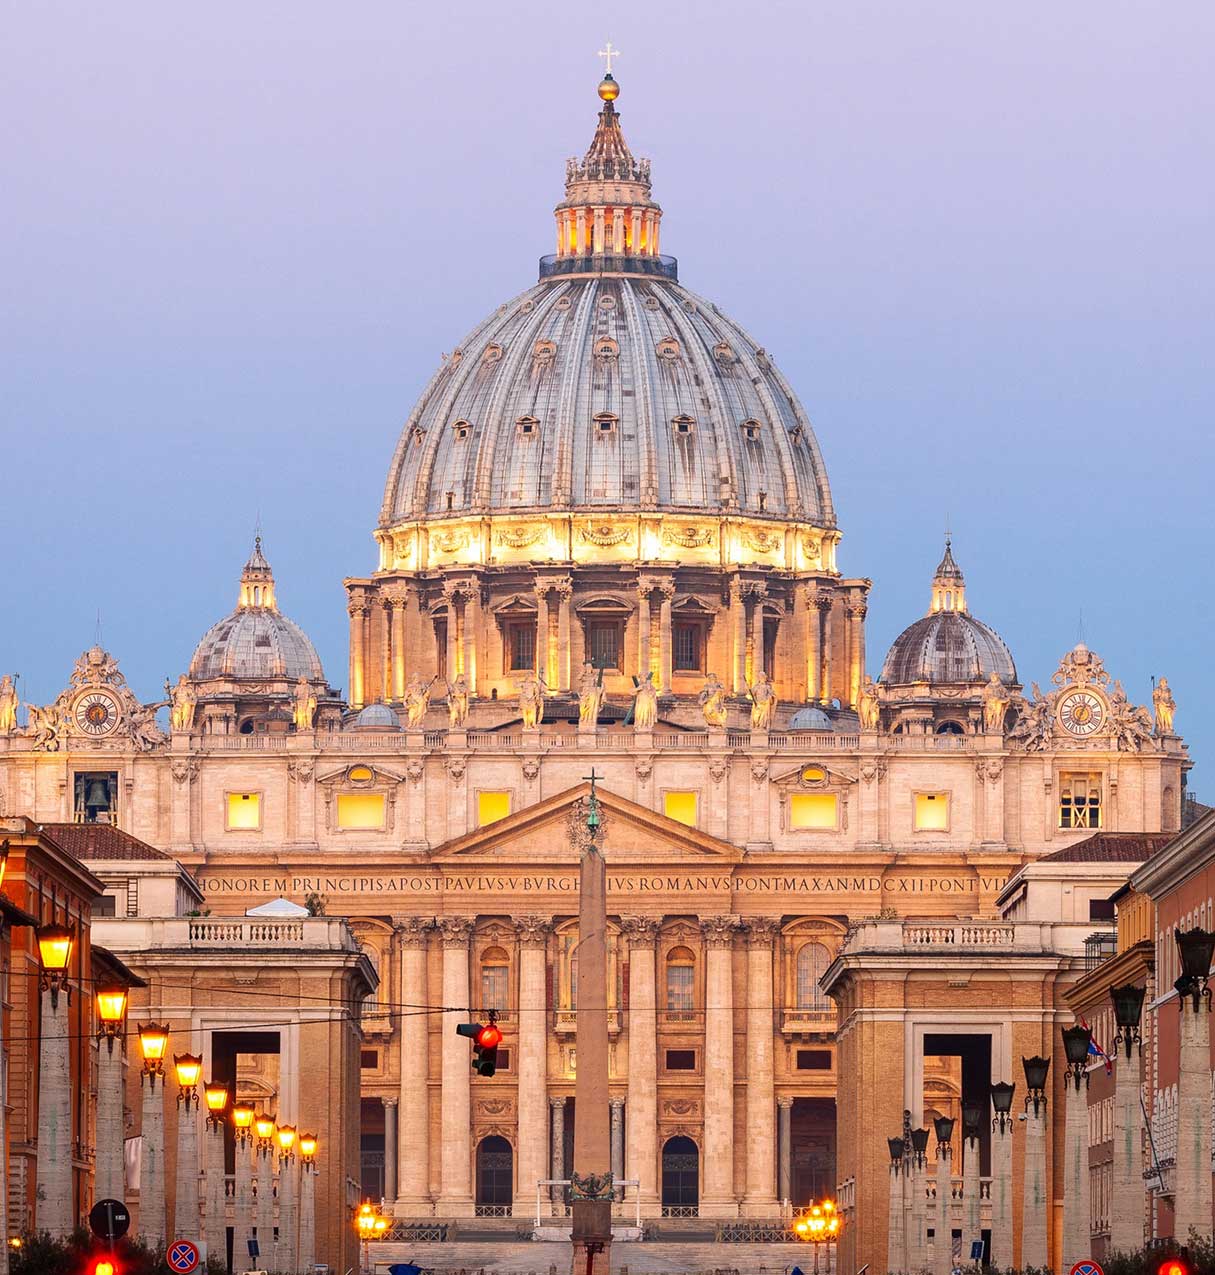 Vatican Museums, Sistine Chapel & St. Peter's Basilica Guided Tour